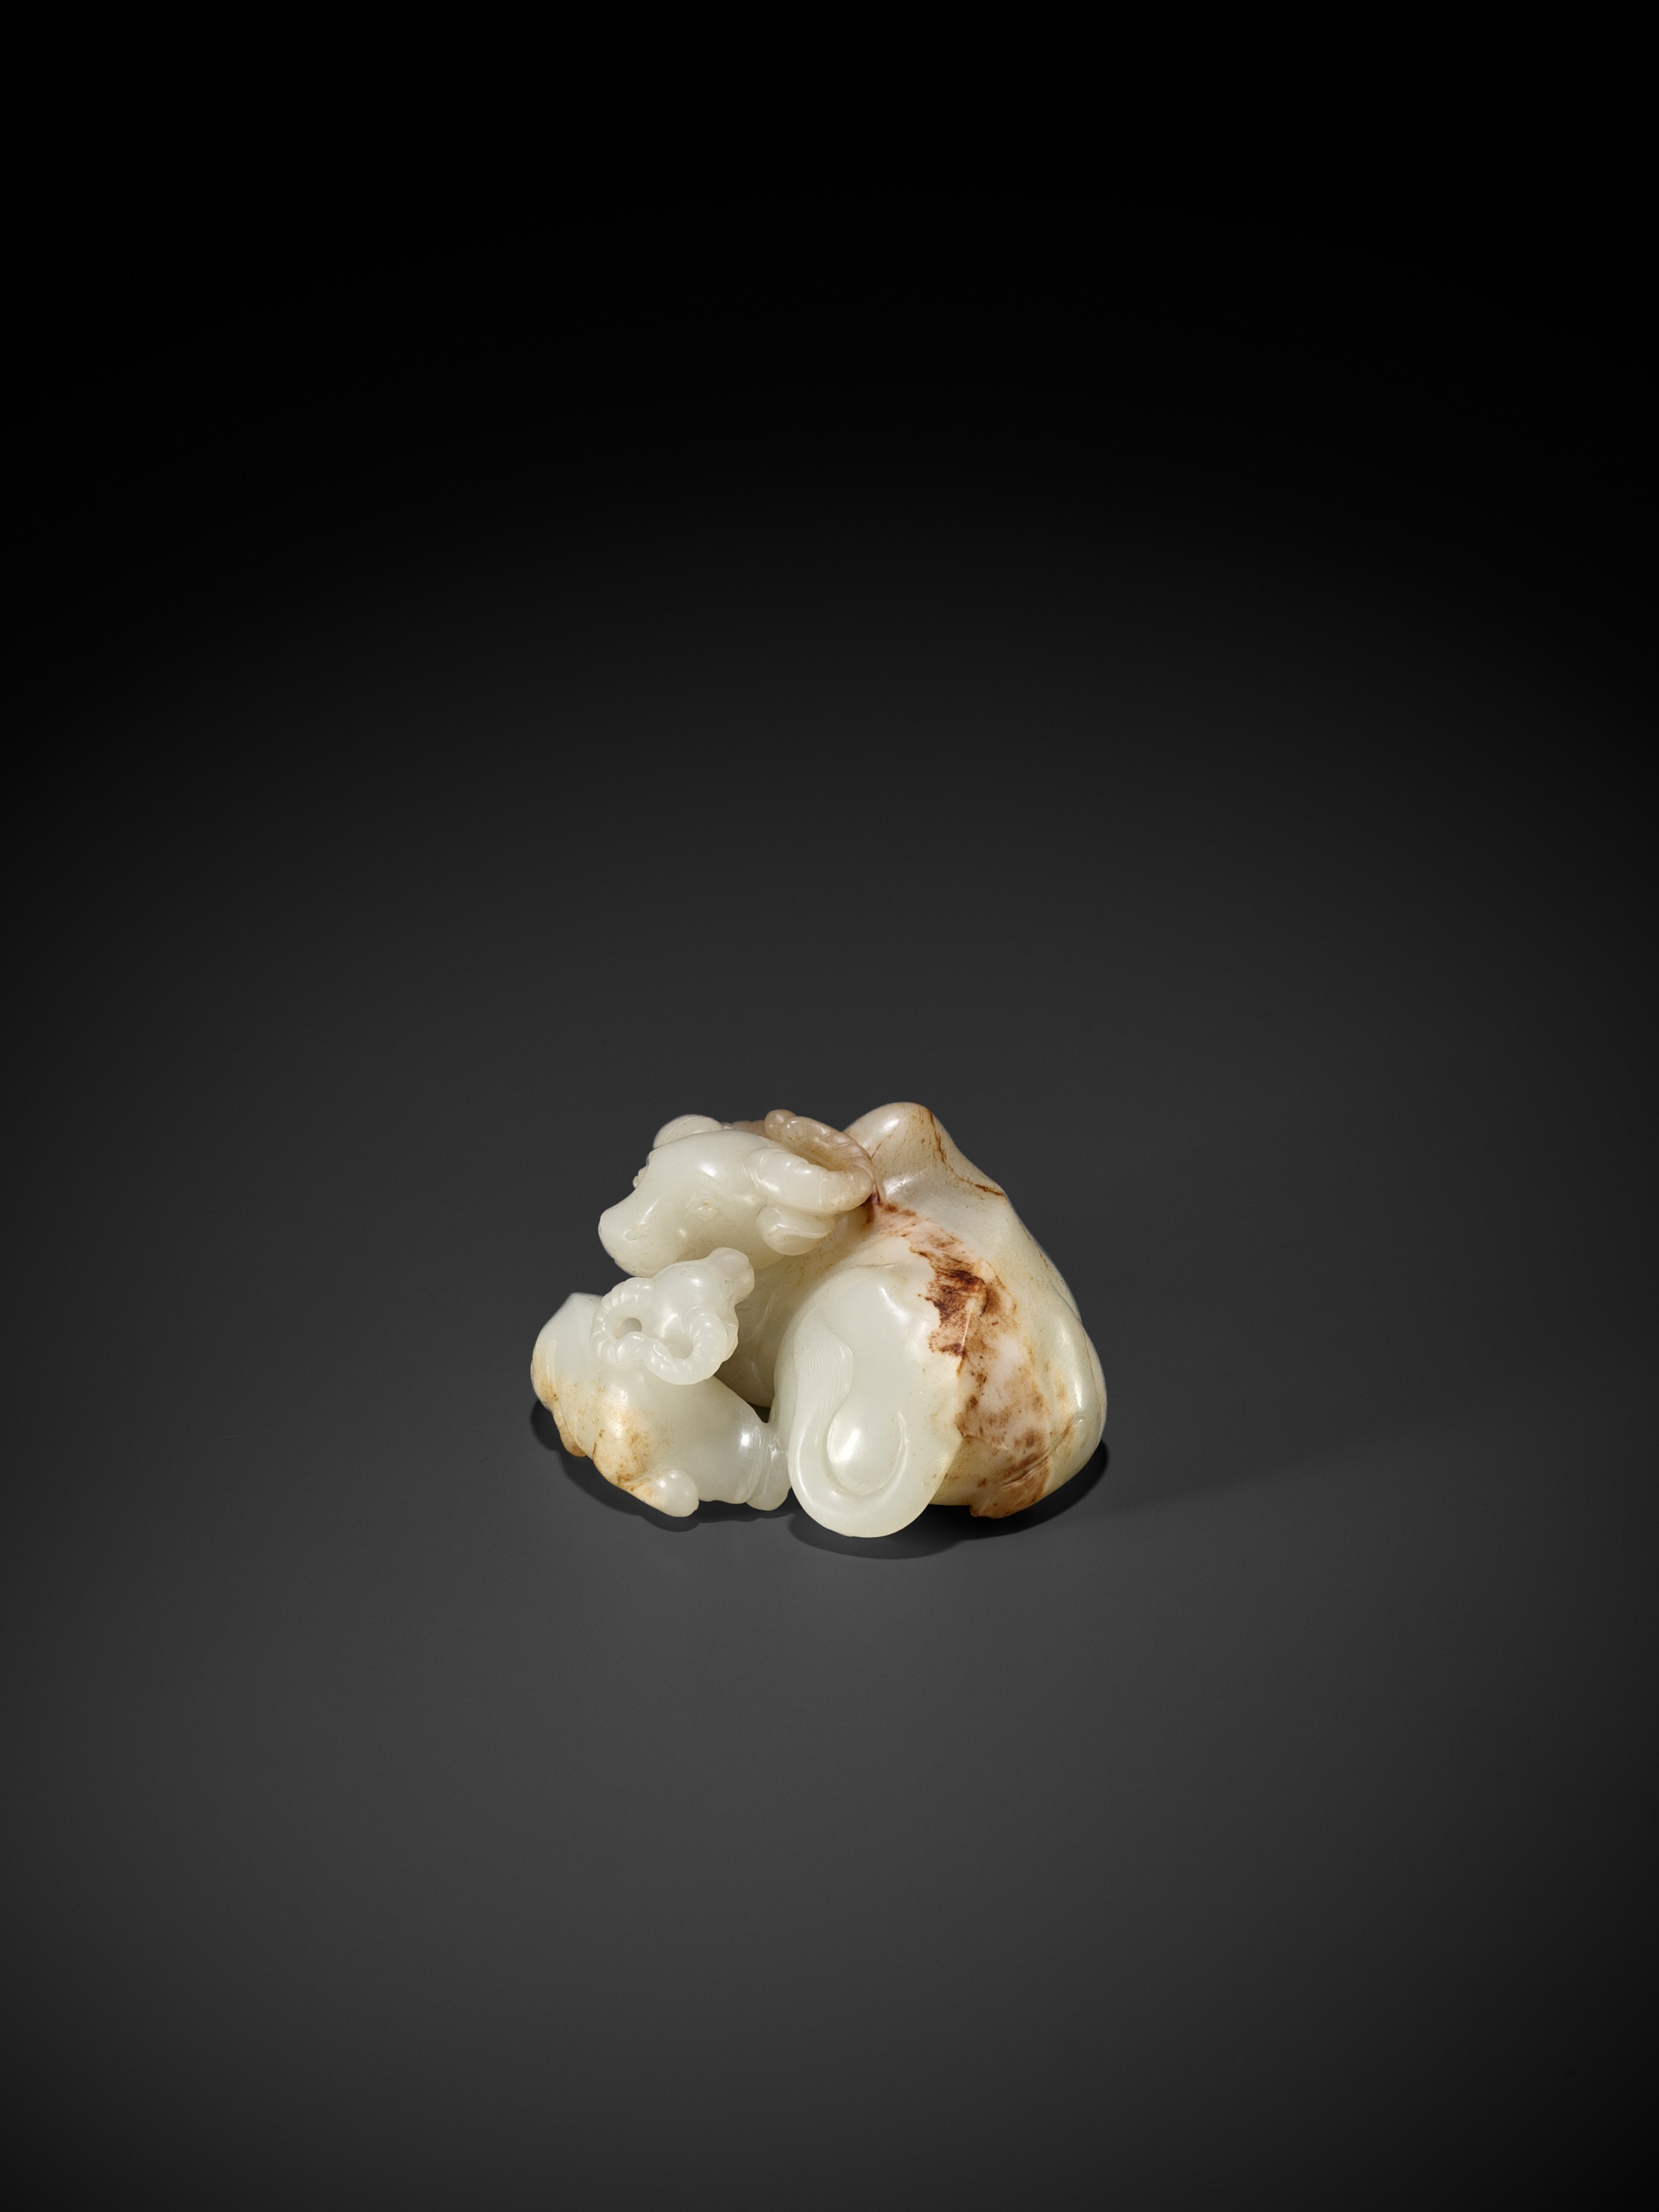 A WHITE AND RUSSET JADE GROUP OF A WATER BUFFALO AND A CALF, 18TH - 19TH CENTURY - Image 7 of 10